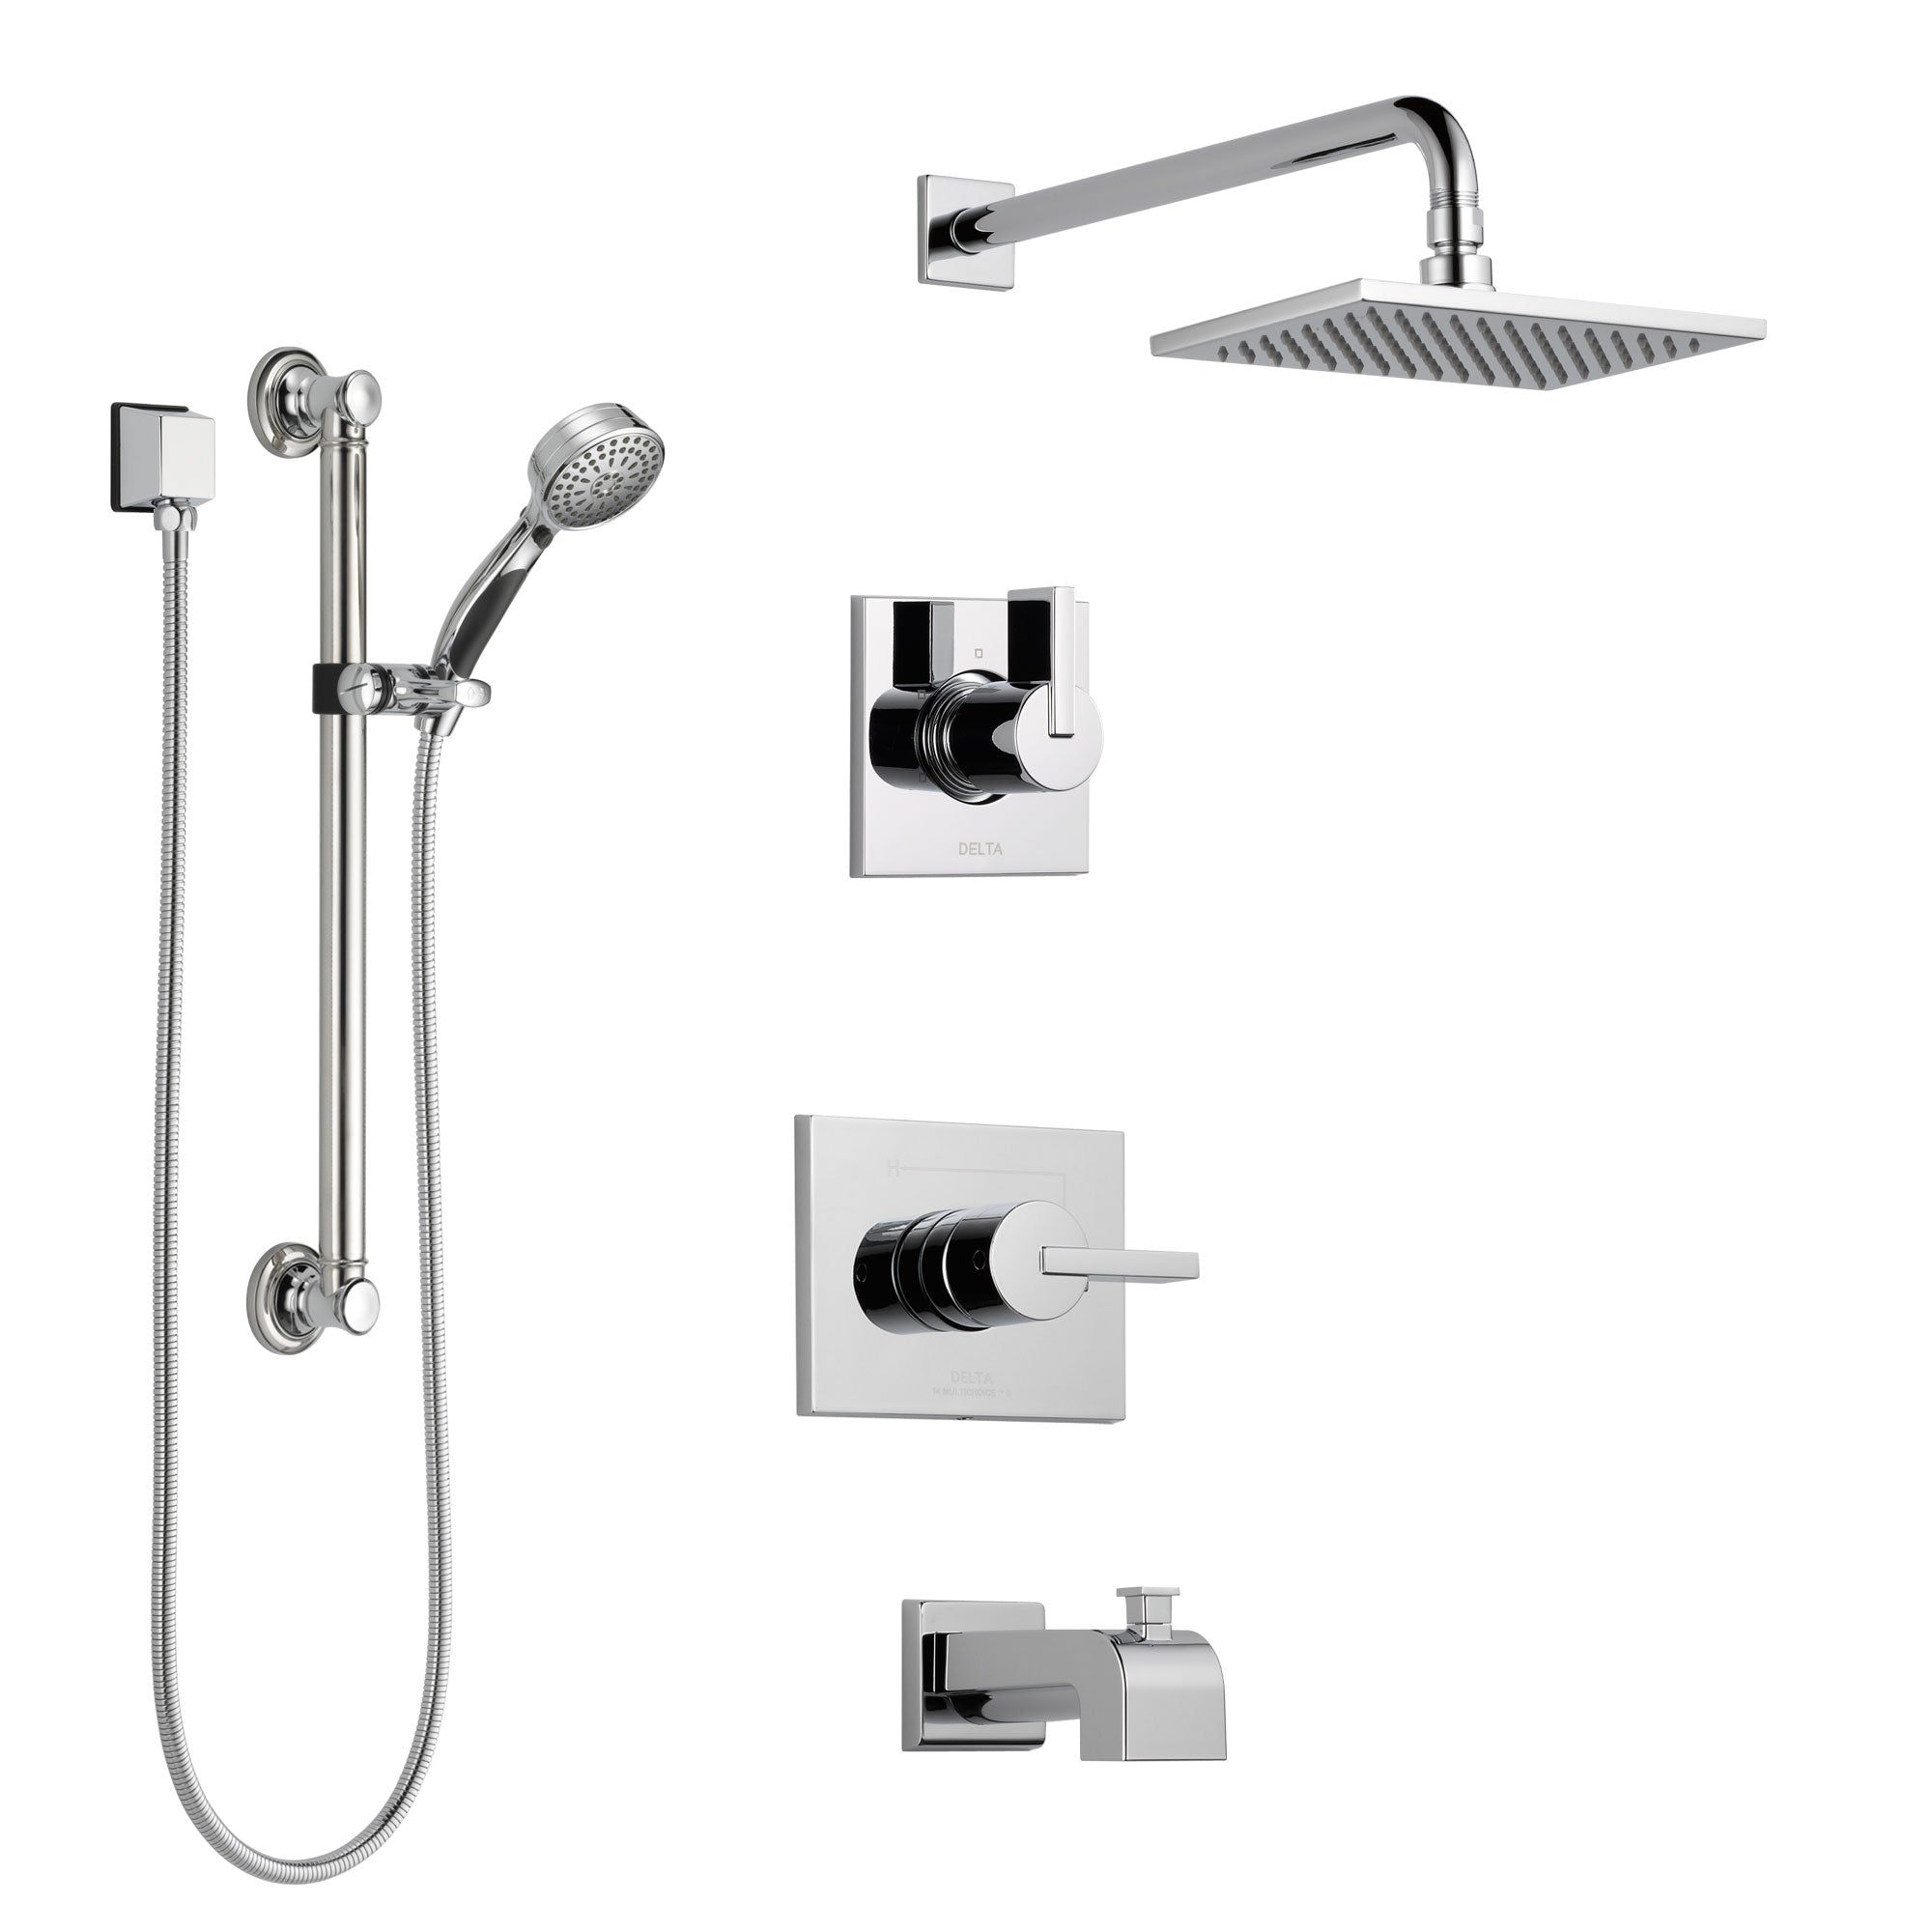 Delta Vero Chrome Finish Tub and Shower System with Control Handle, 3-Setting Diverter, Showerhead, and Hand Shower with Grab Bar SS1445323